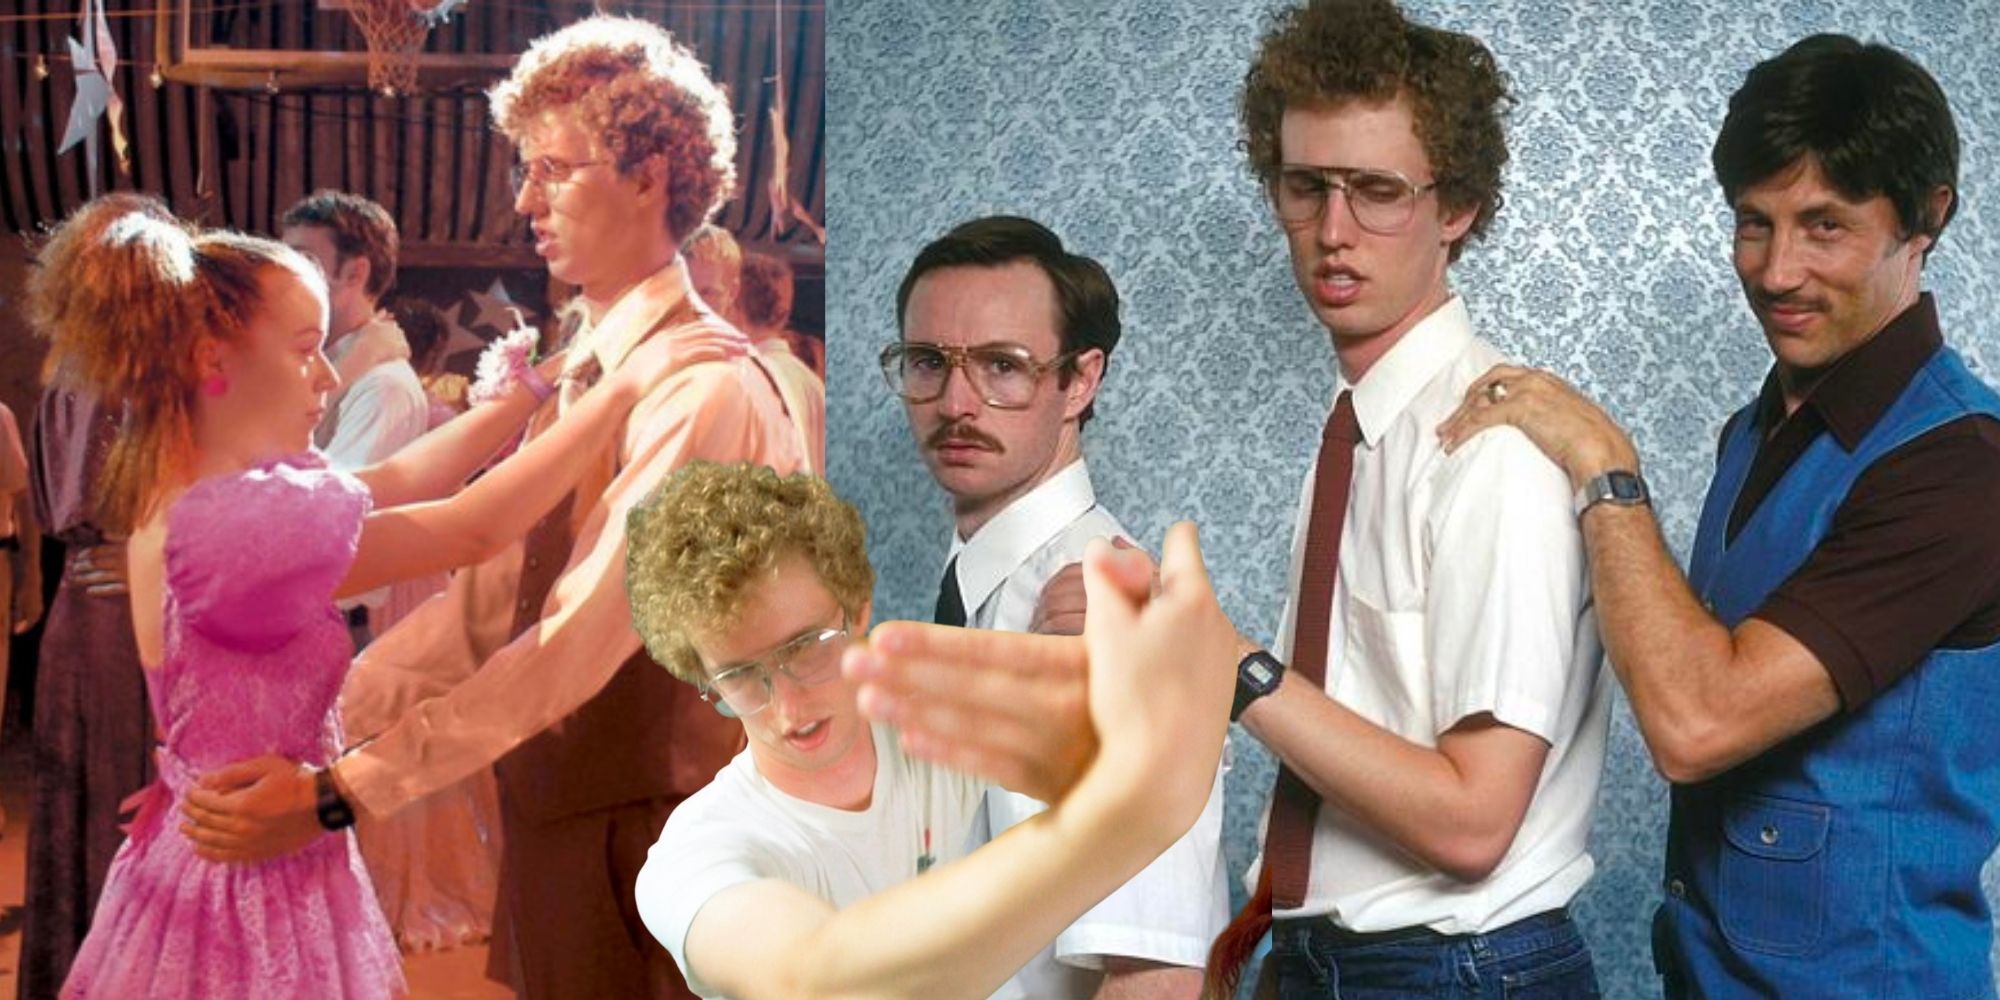 Napoleon Dynamite Jon Heder at the dance with Deb and a professional family photo of Napoleon with Kip and Uncle Rico